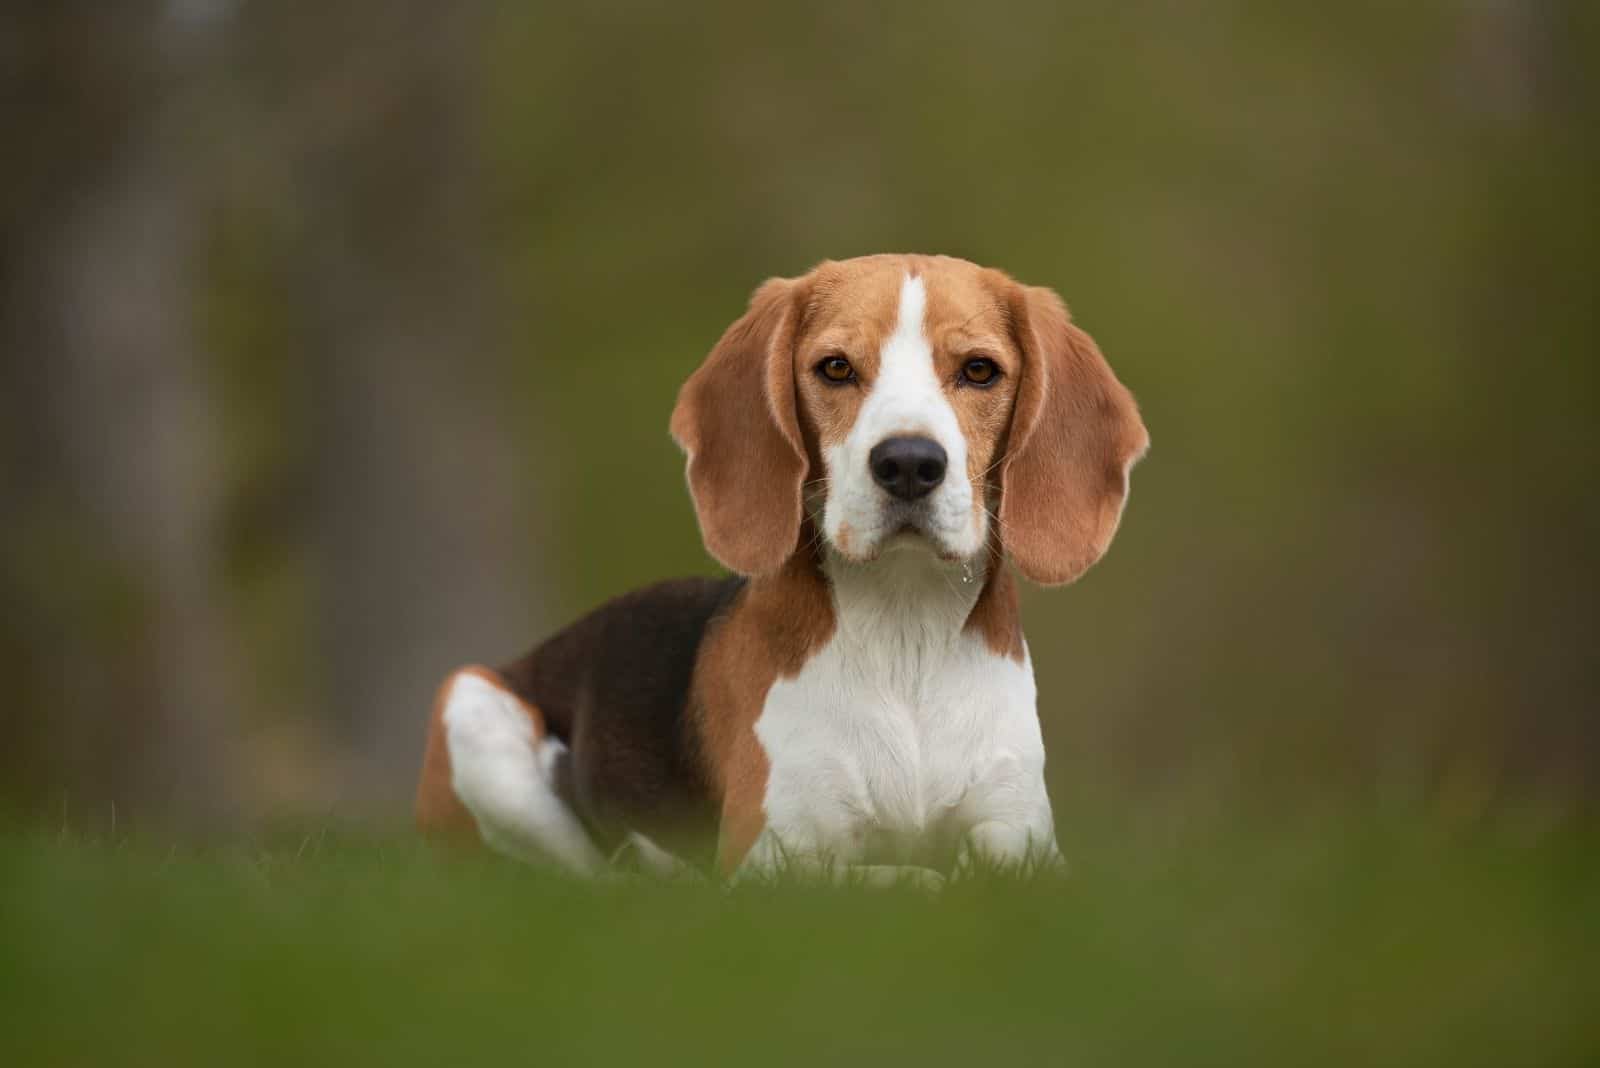 cute beagle dog in the middle of the green grass with blurry background